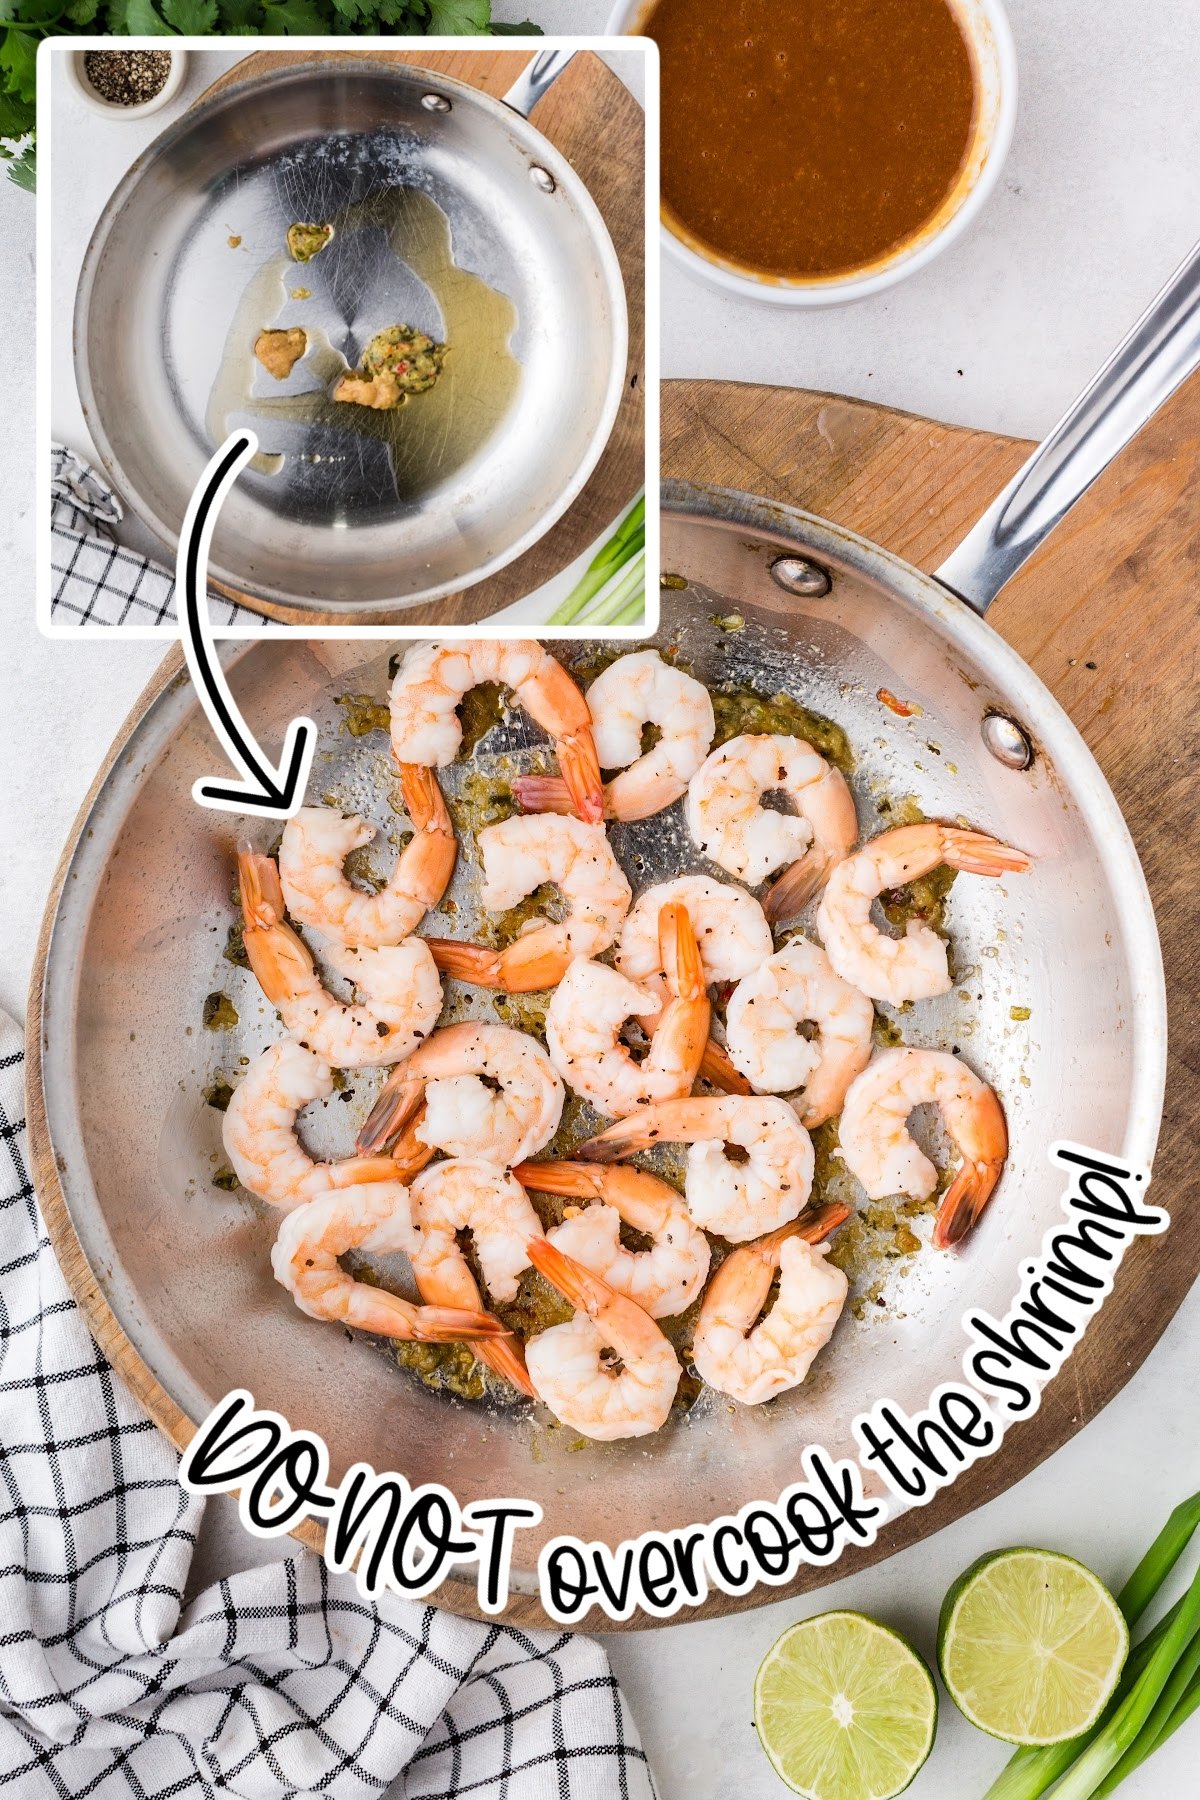 Shrimp being sautéed in a pan.